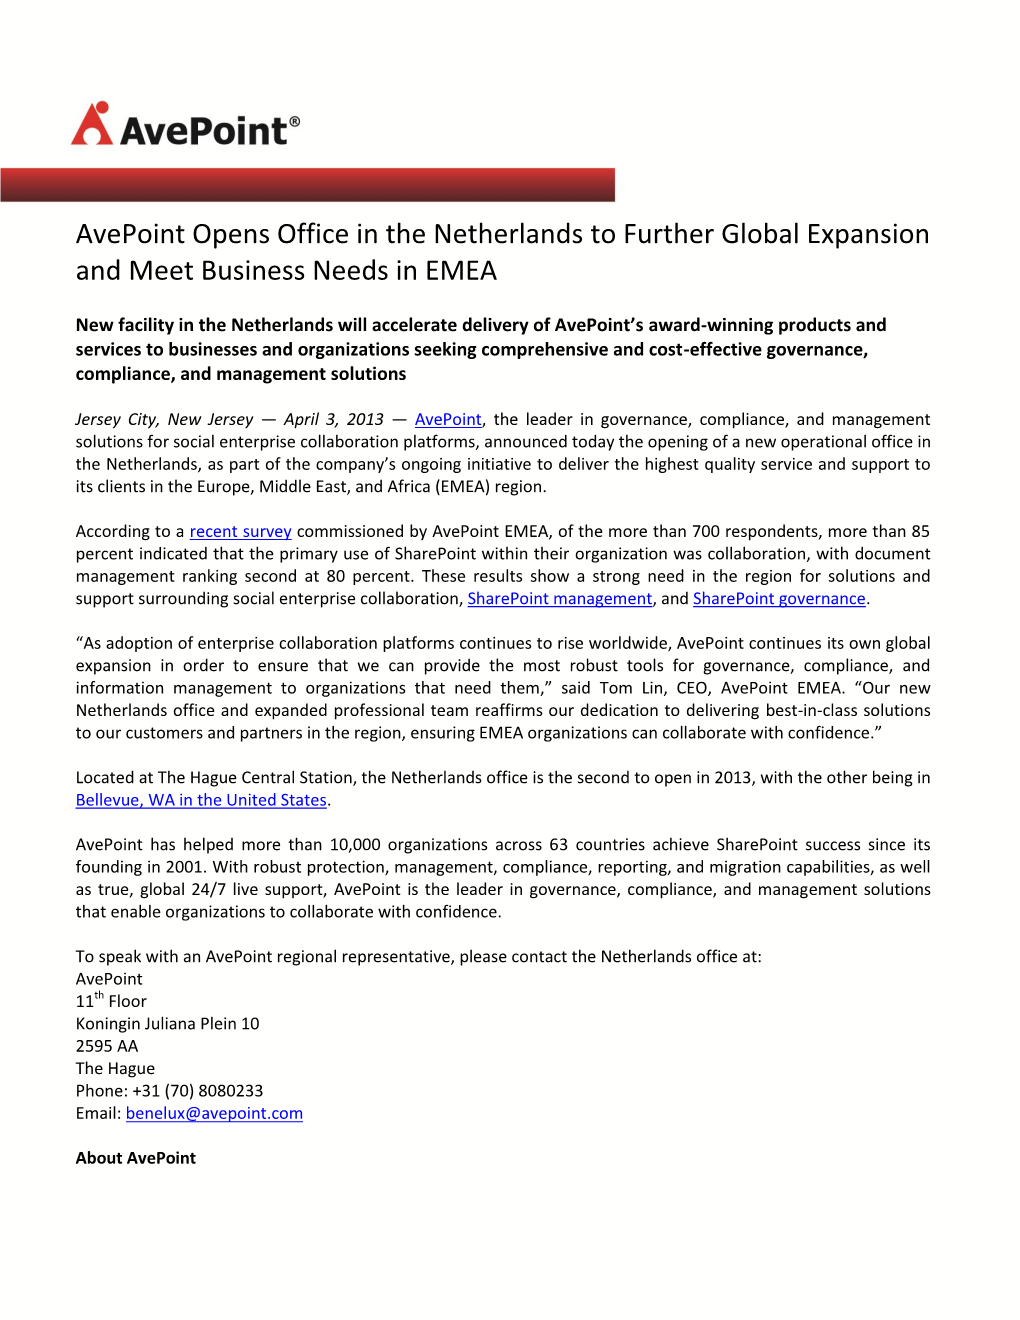 Avepoint Opens Office in the Netherlands to Further Global Expansion and Meet Business Needs in EMEA